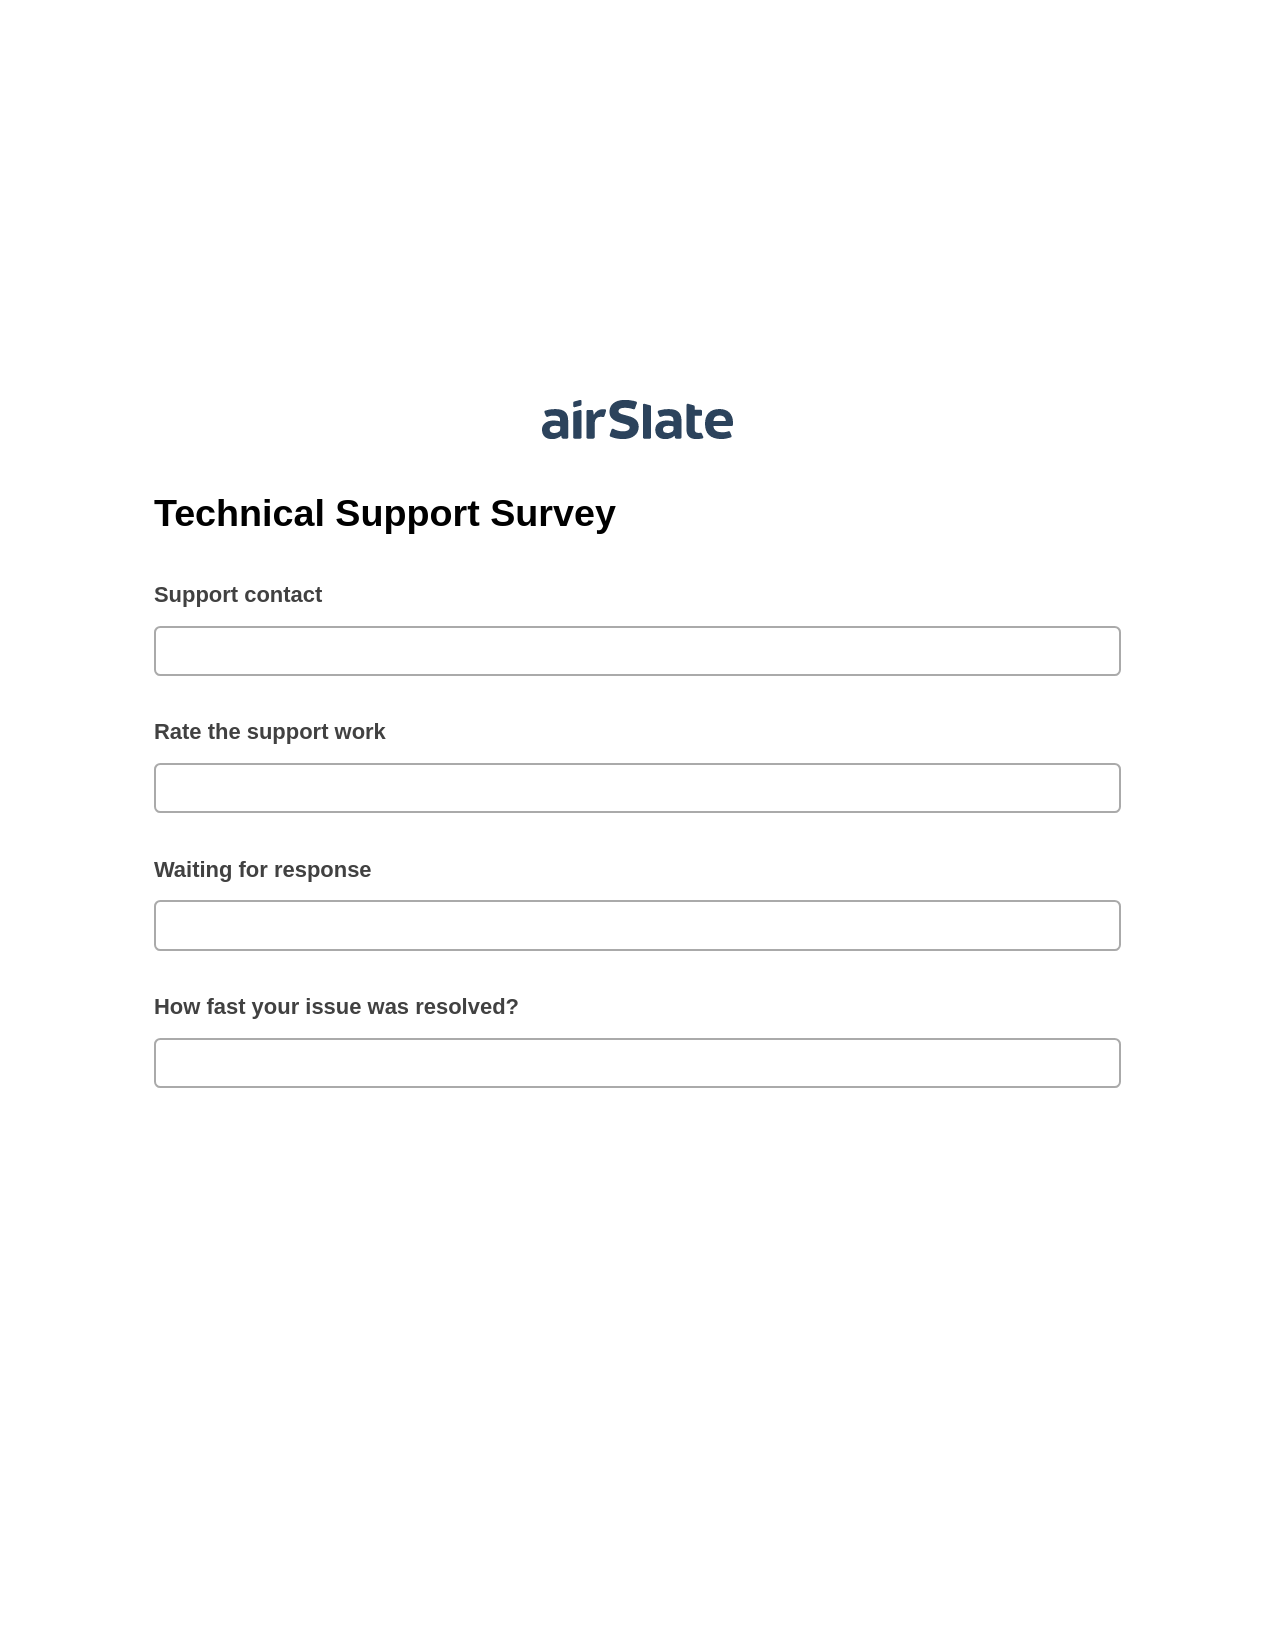 Technical Support Survey Pre-fill from Salesforce Records with SOQL Bot, Remove Tags From Slate Bot, Export to WebMerge Bot